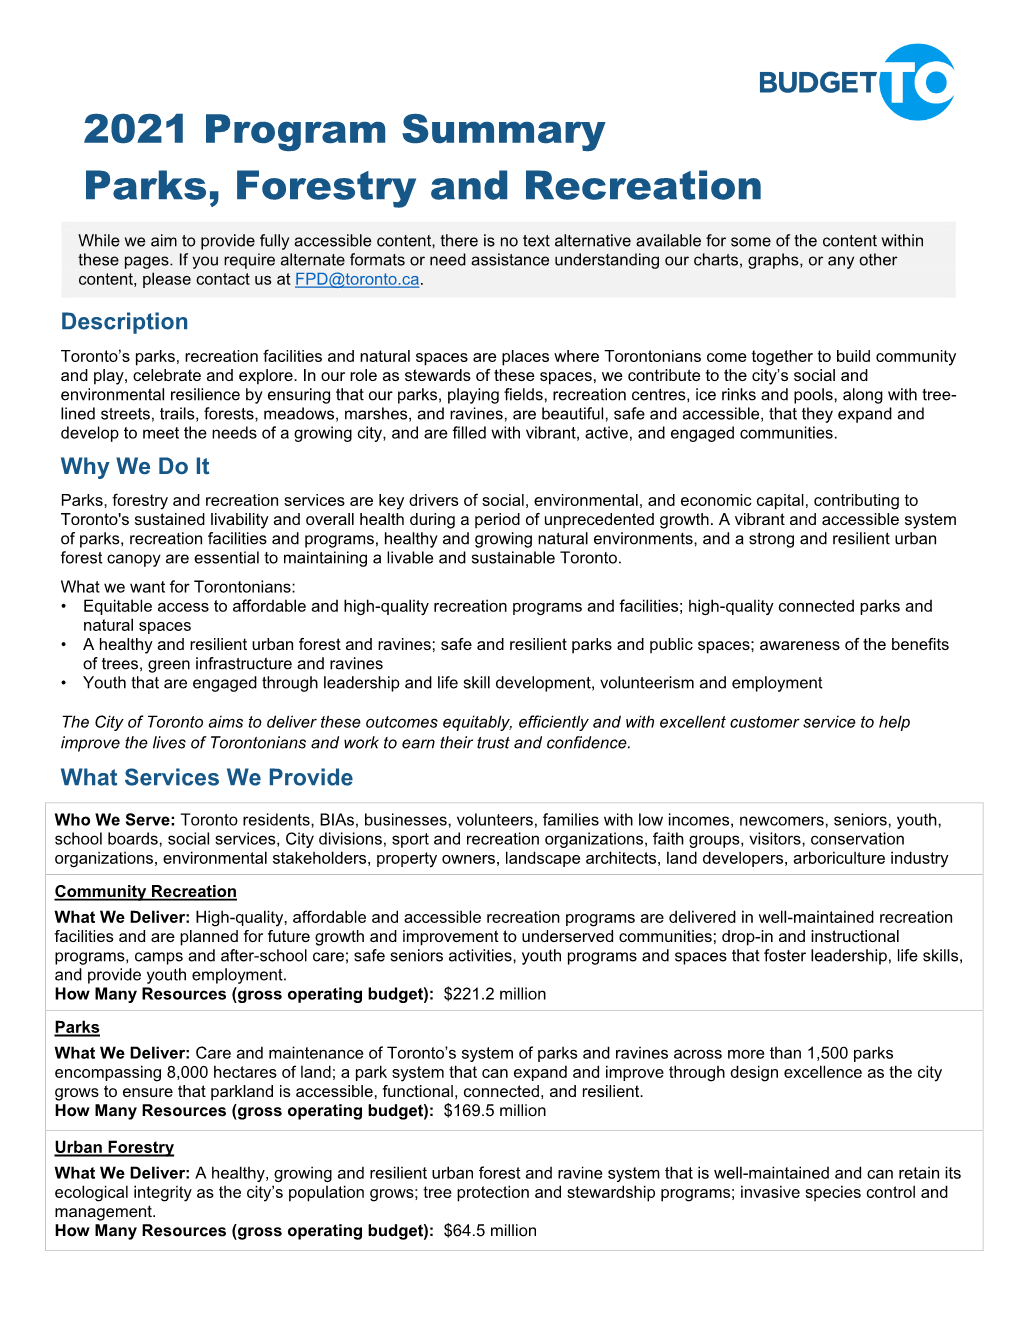 2021 Program Summary Parks, Forestry and Recreation